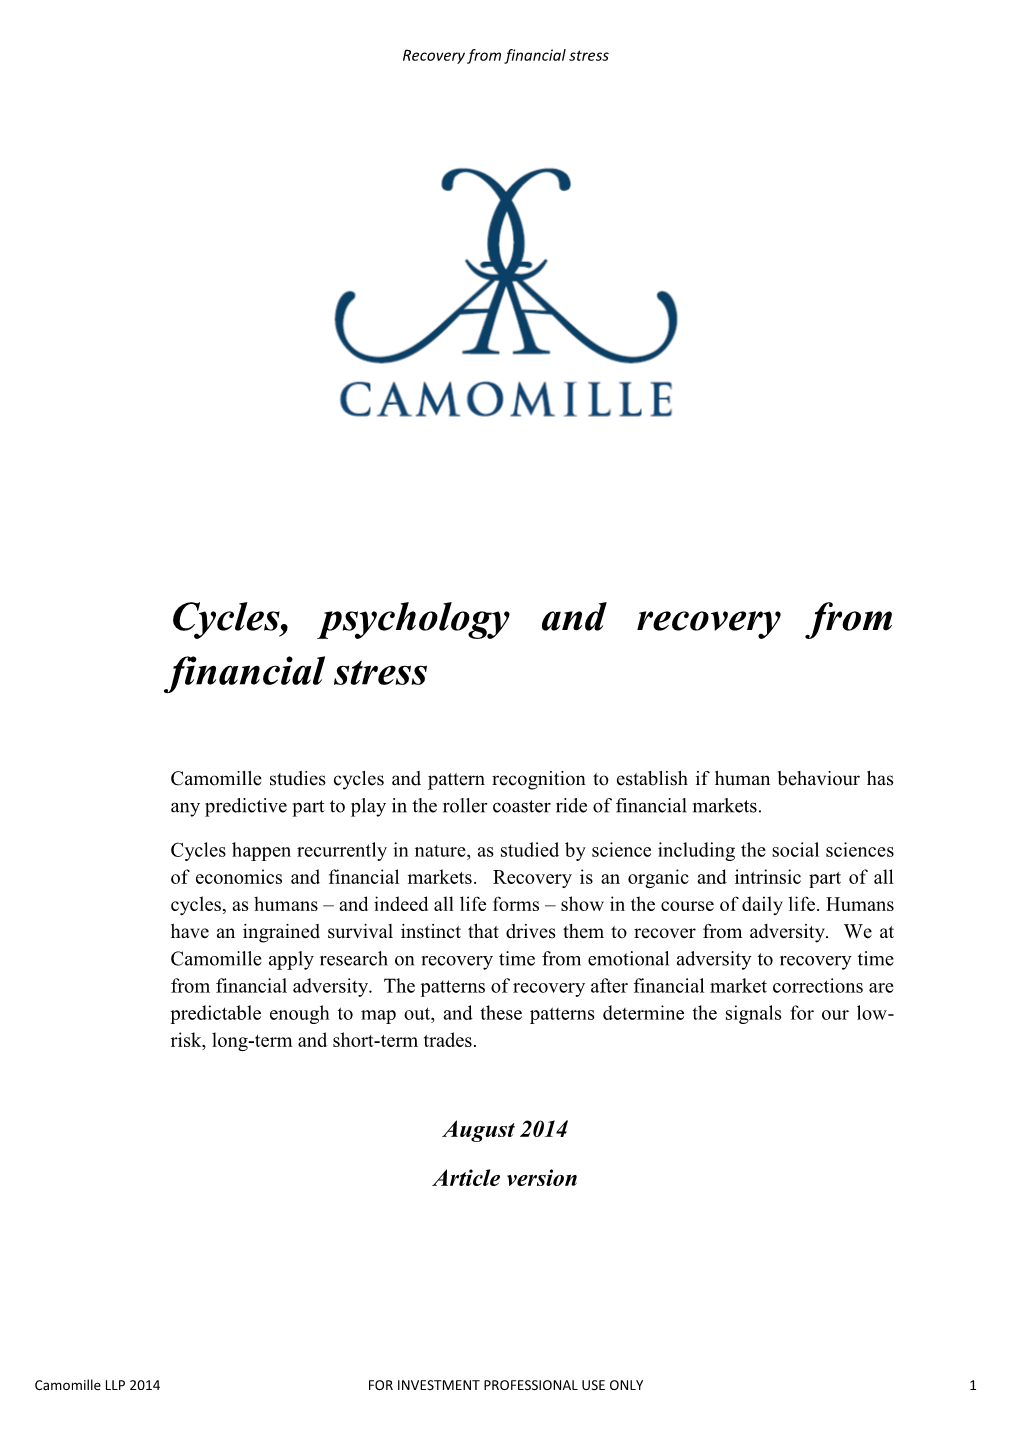 Cycles, Psychology and Recovery from Financial Stress